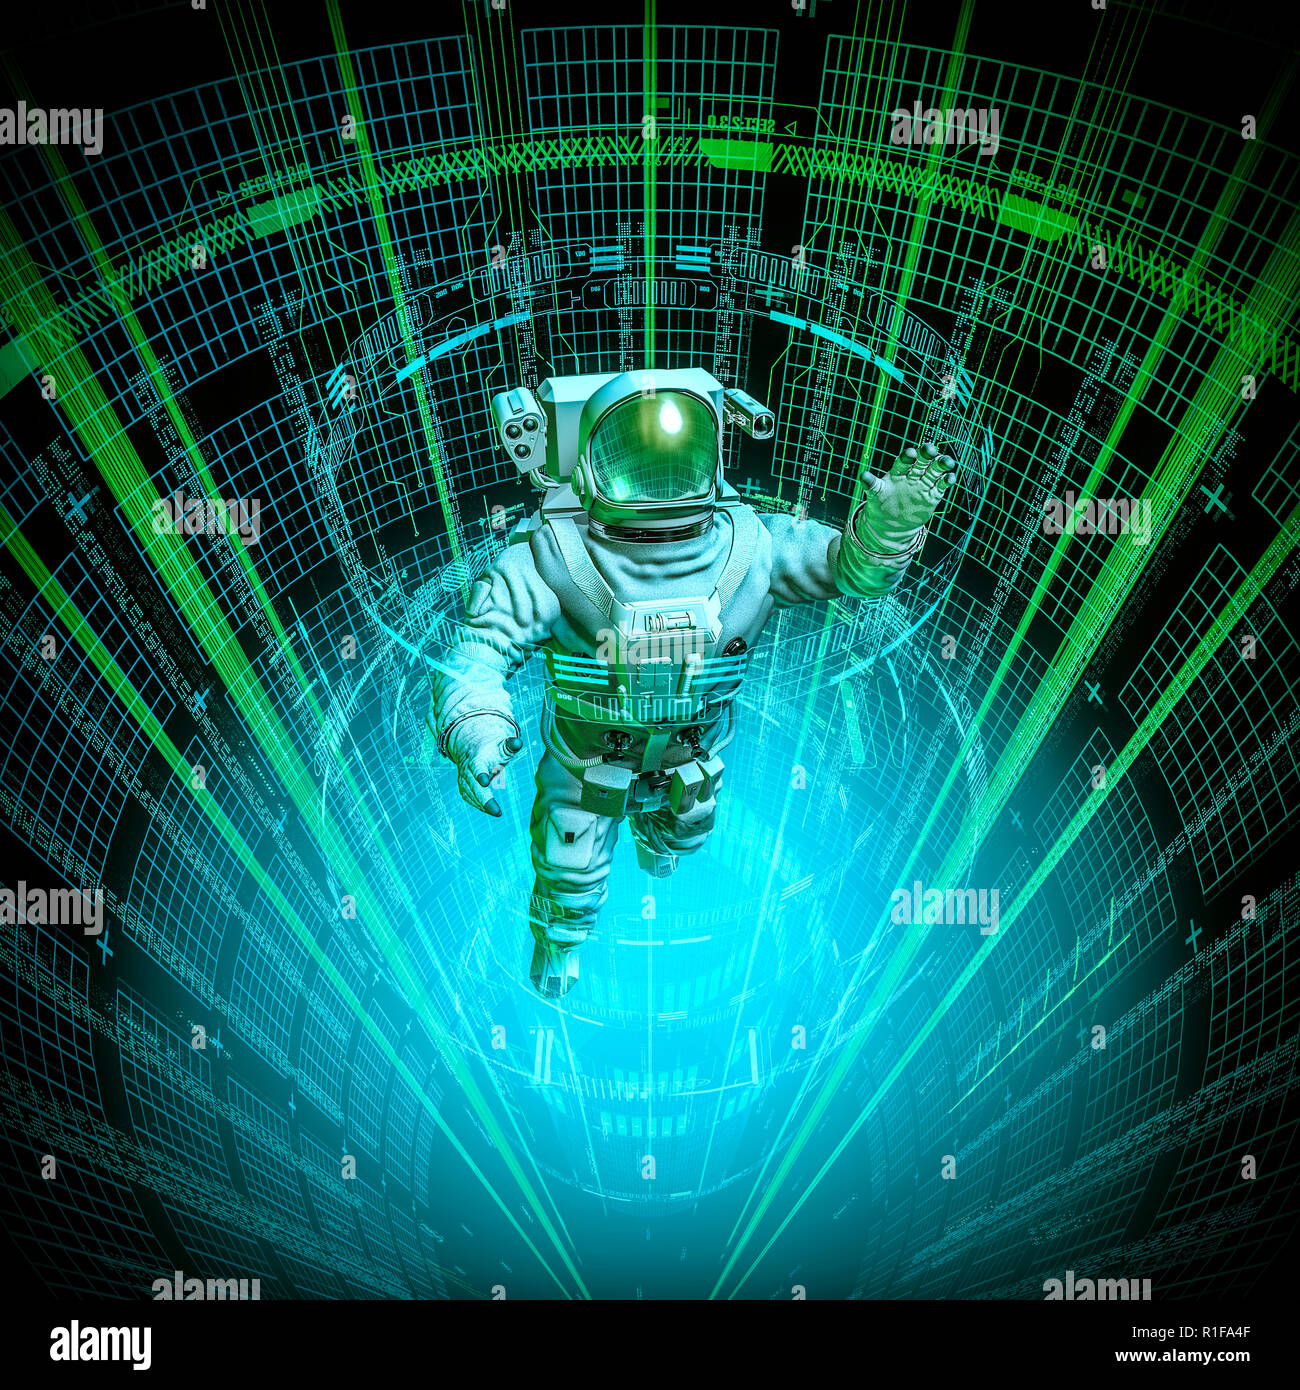 Virtual data core astronaut / 3D illustration of astronaut in space suit floating up through glowing virtual data Stock Photo